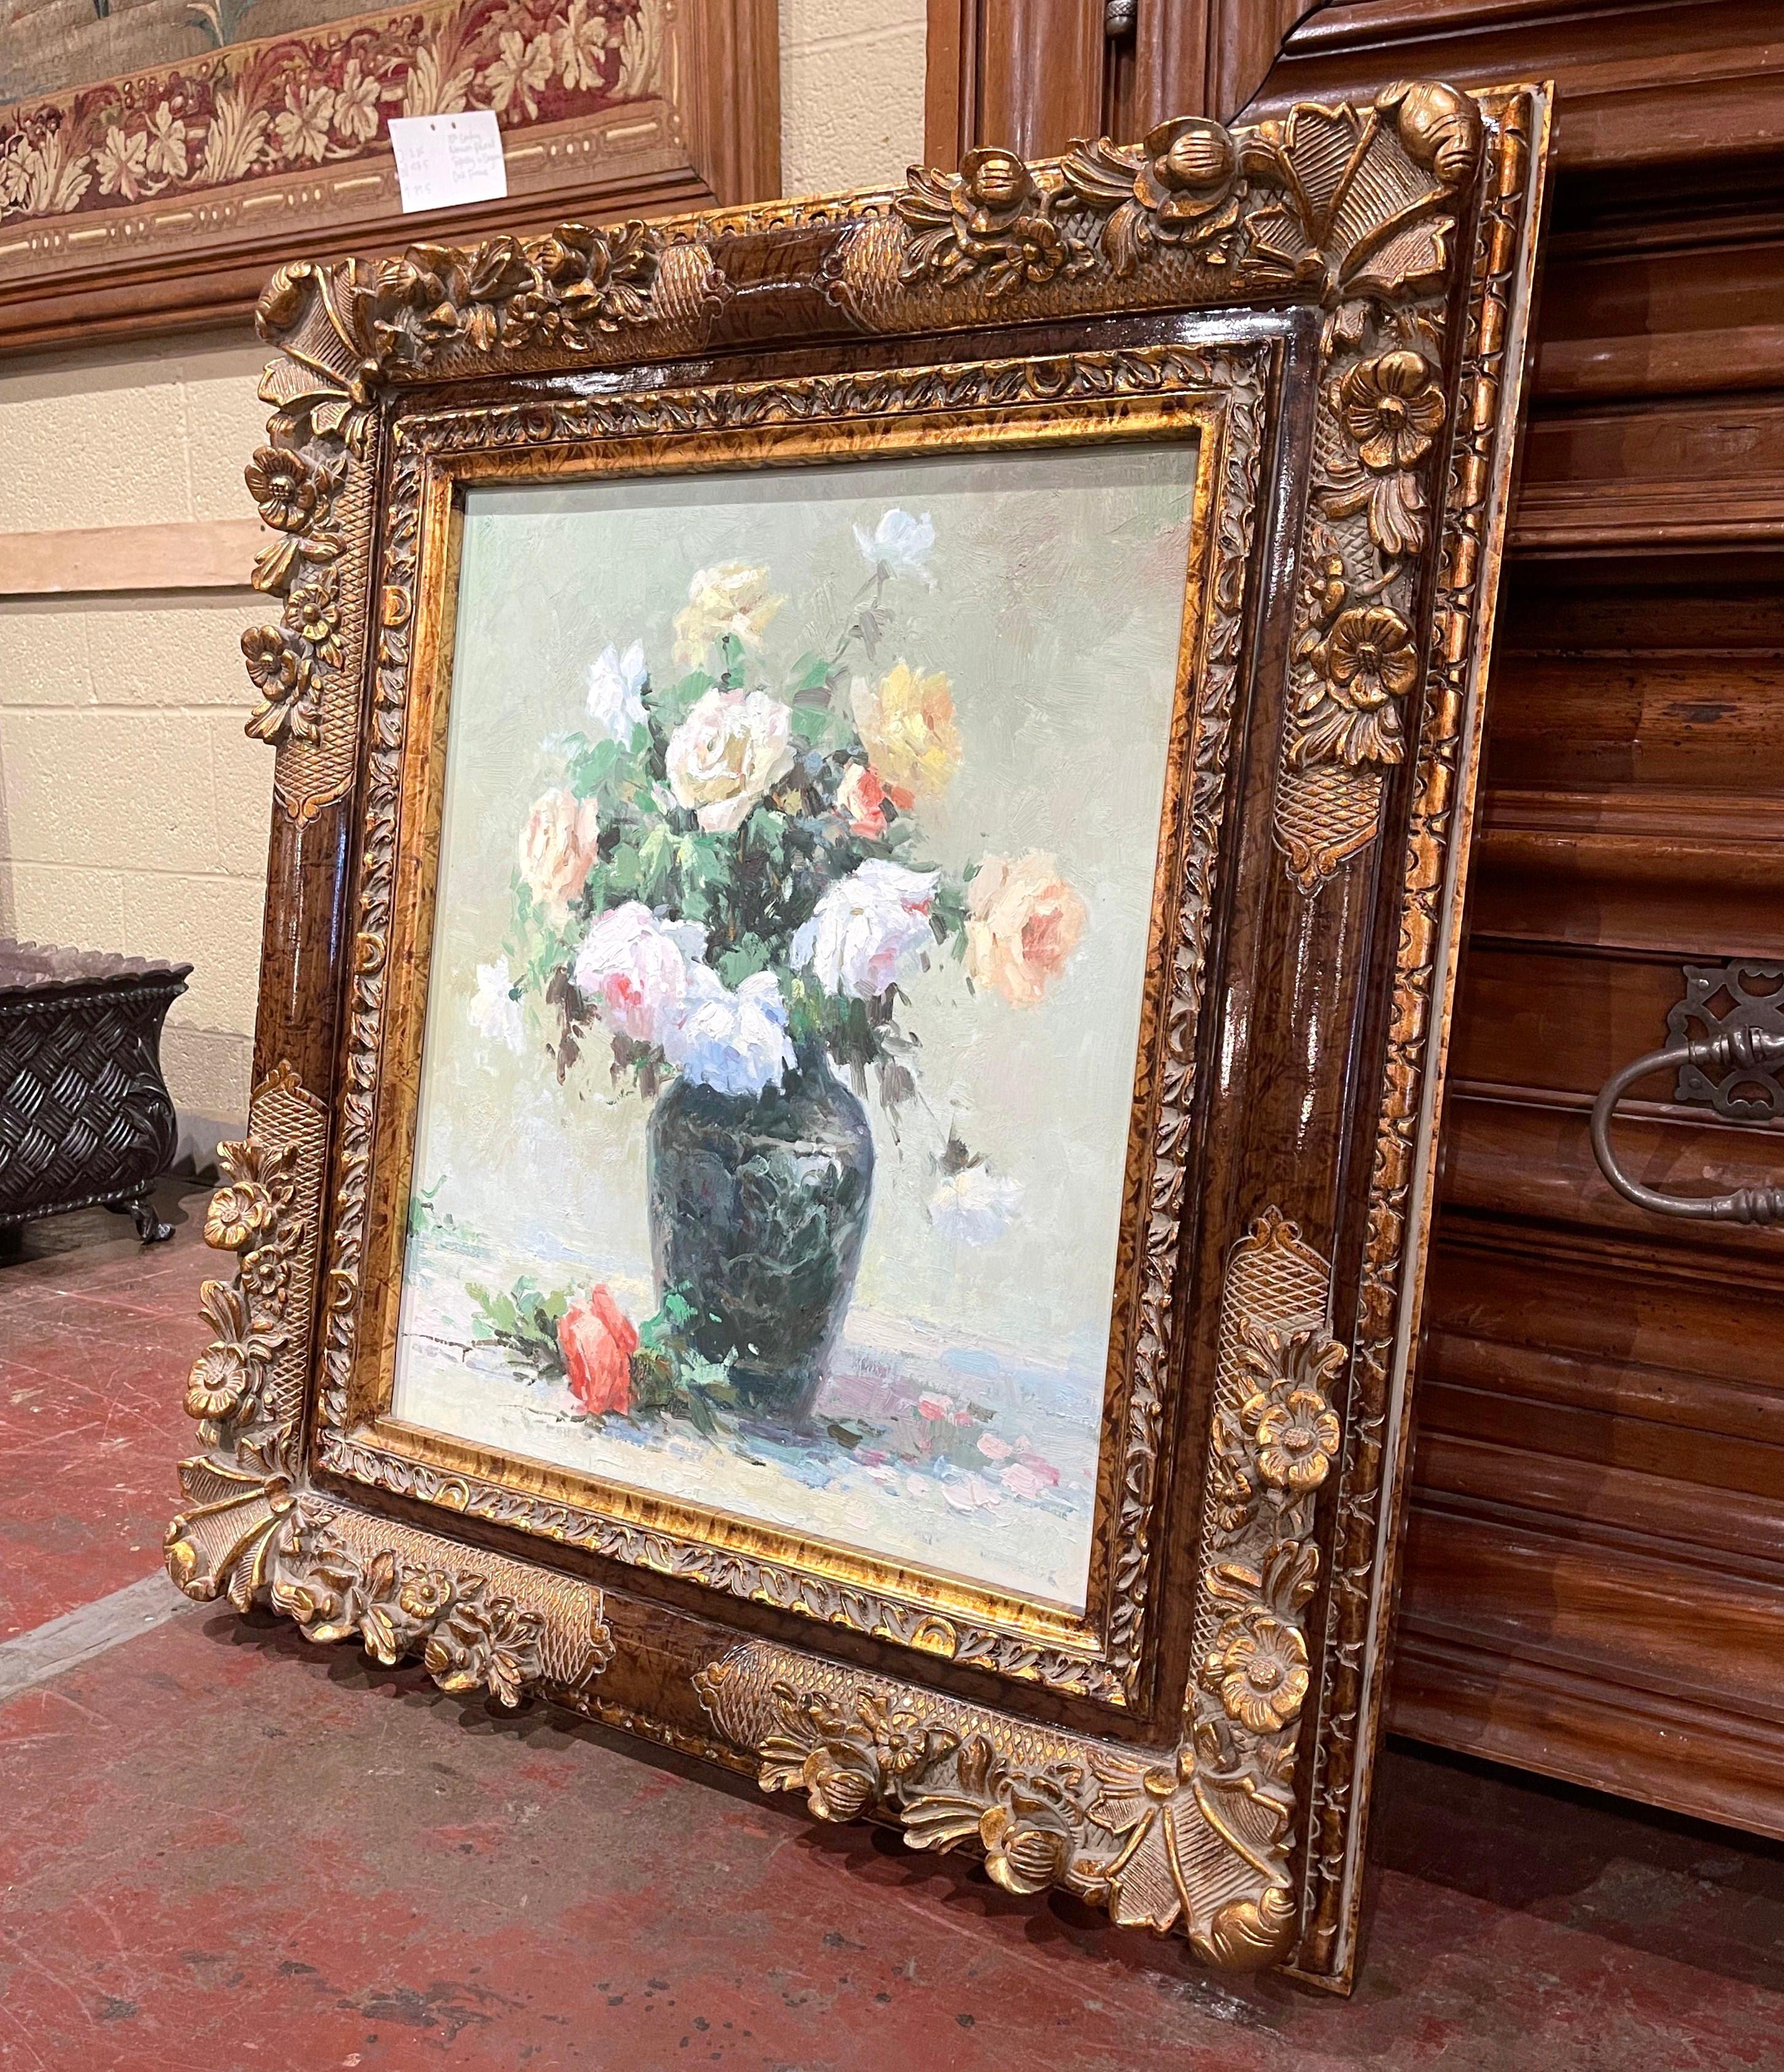 Hand painted in France circa 1980 and set in the original carved giltwood frame, the colorful art work on canvas depicts a still life scene with a terracotta cachepot filled with roses and foliage in the manner of Marcel Dyf. The painting is in